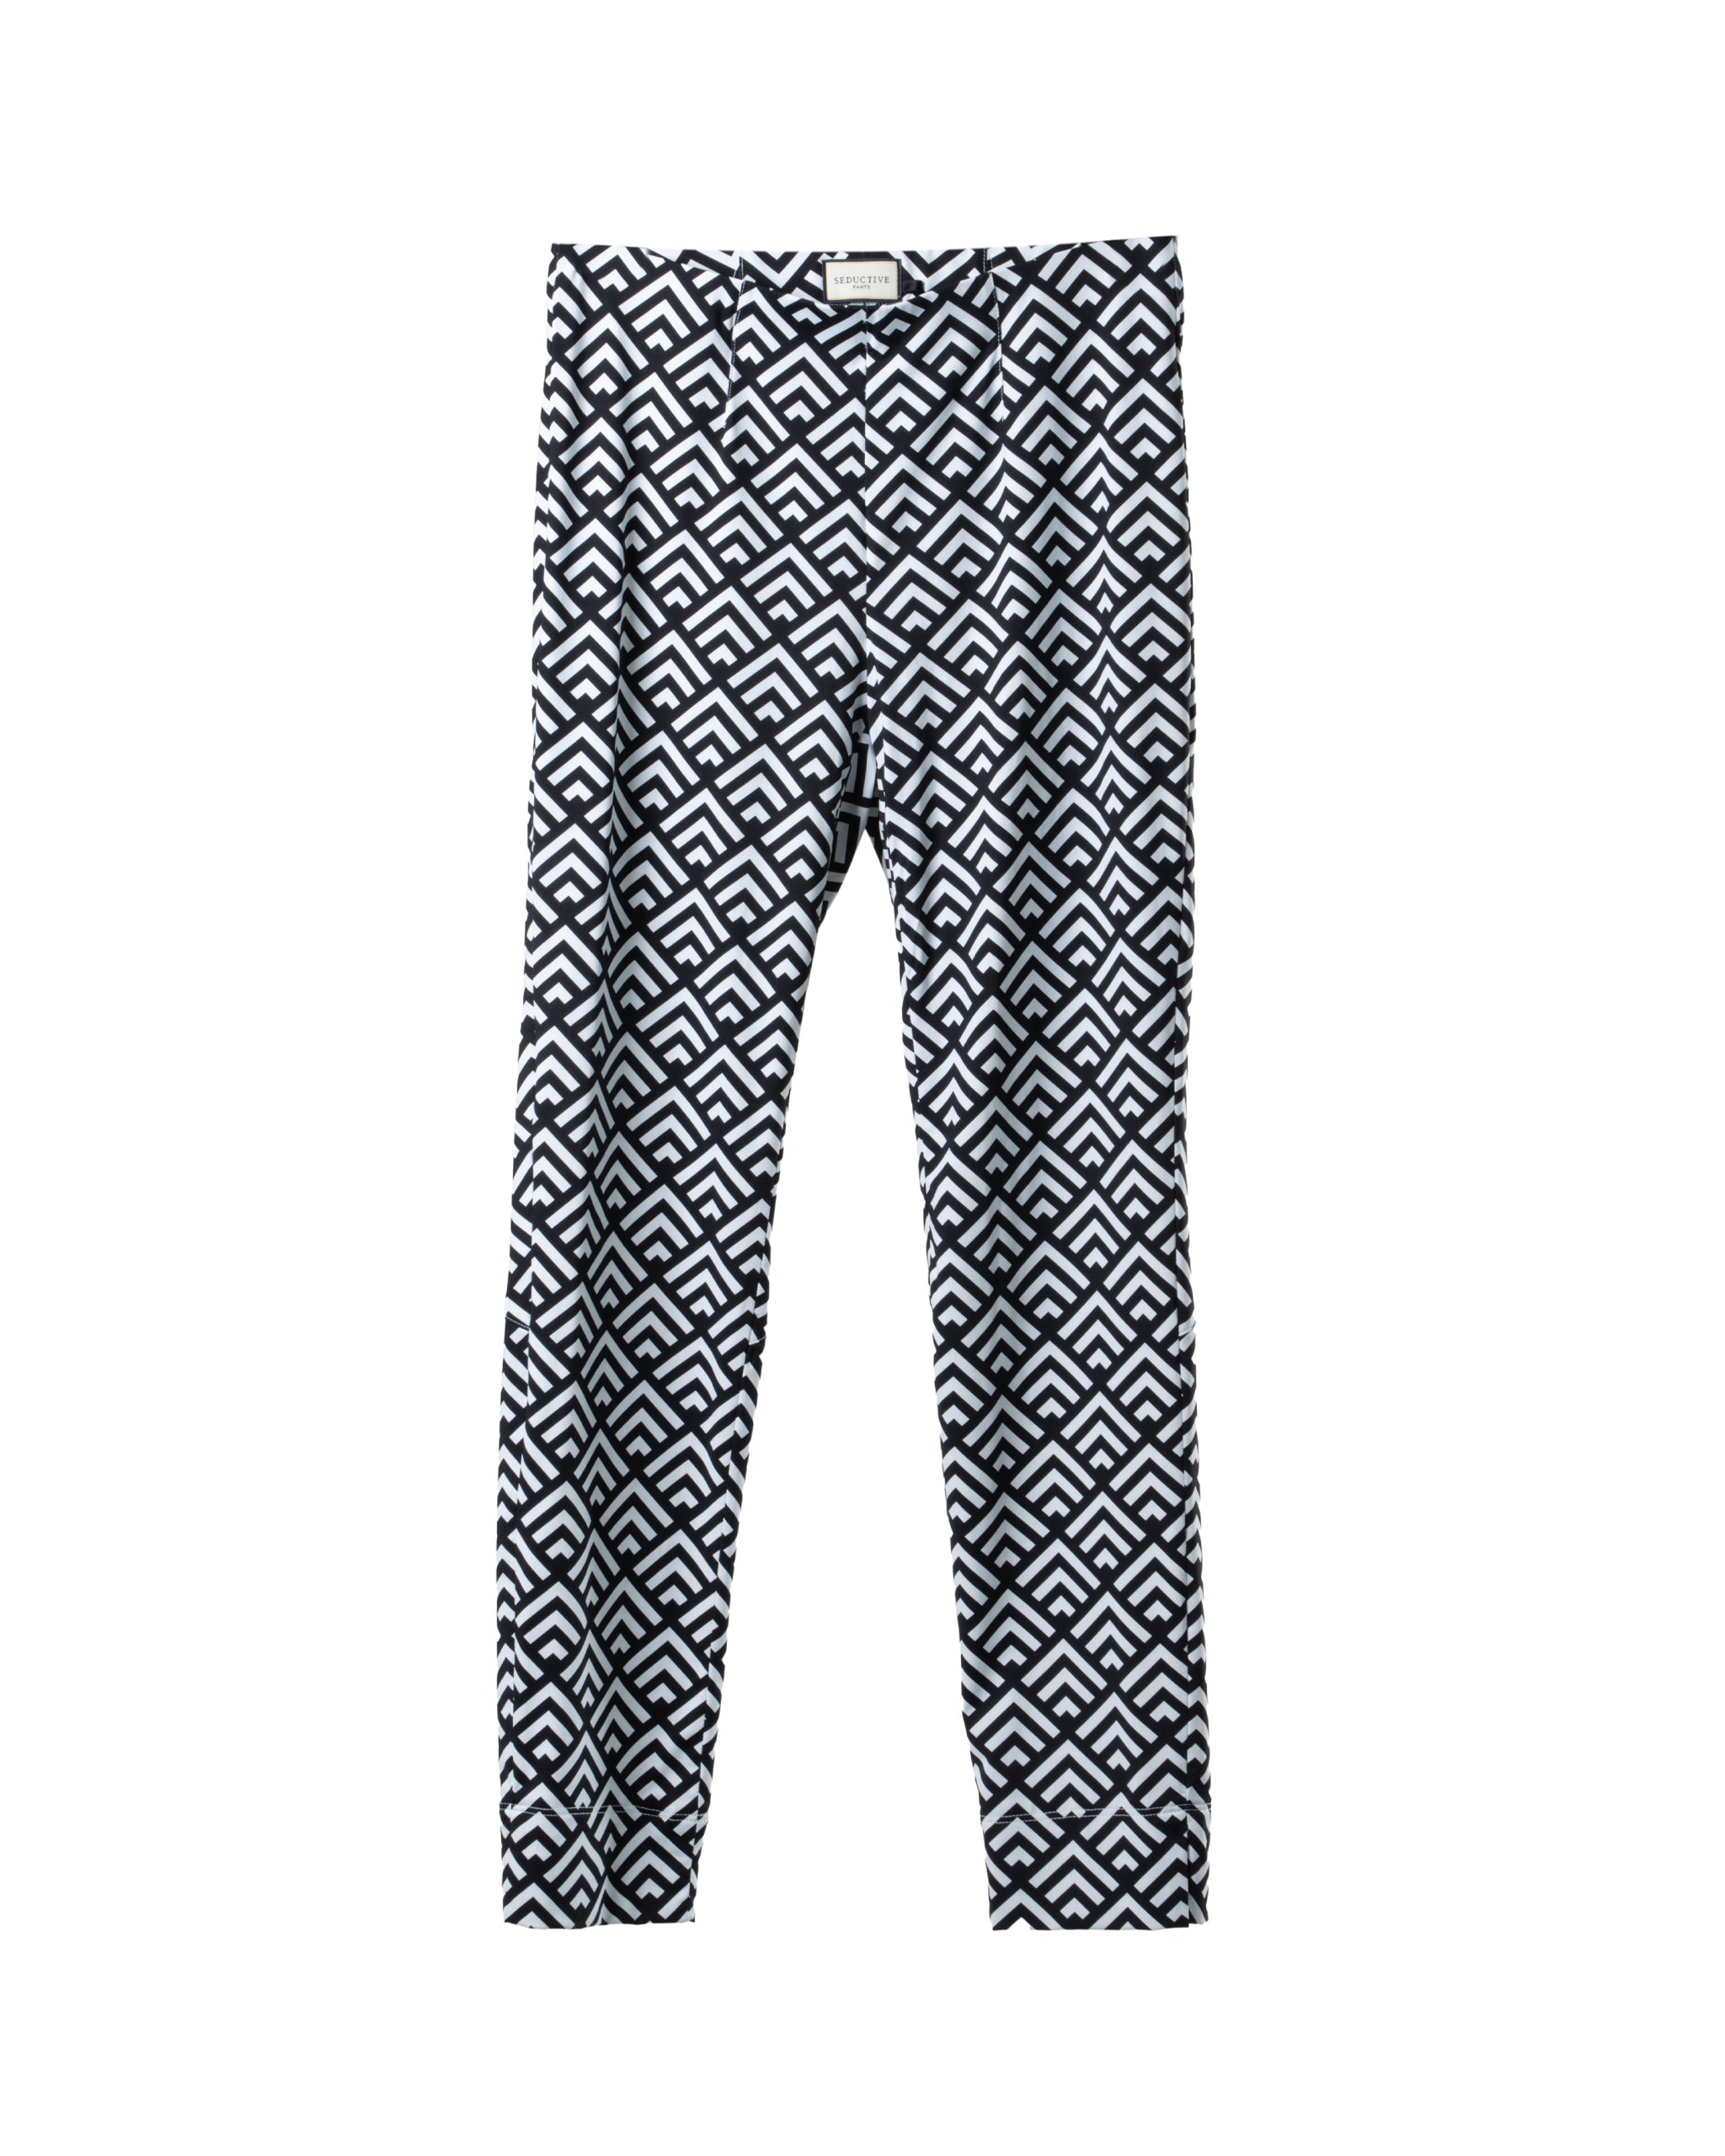 TRIANGLE PRINT SUPERSTRETCH PANTS